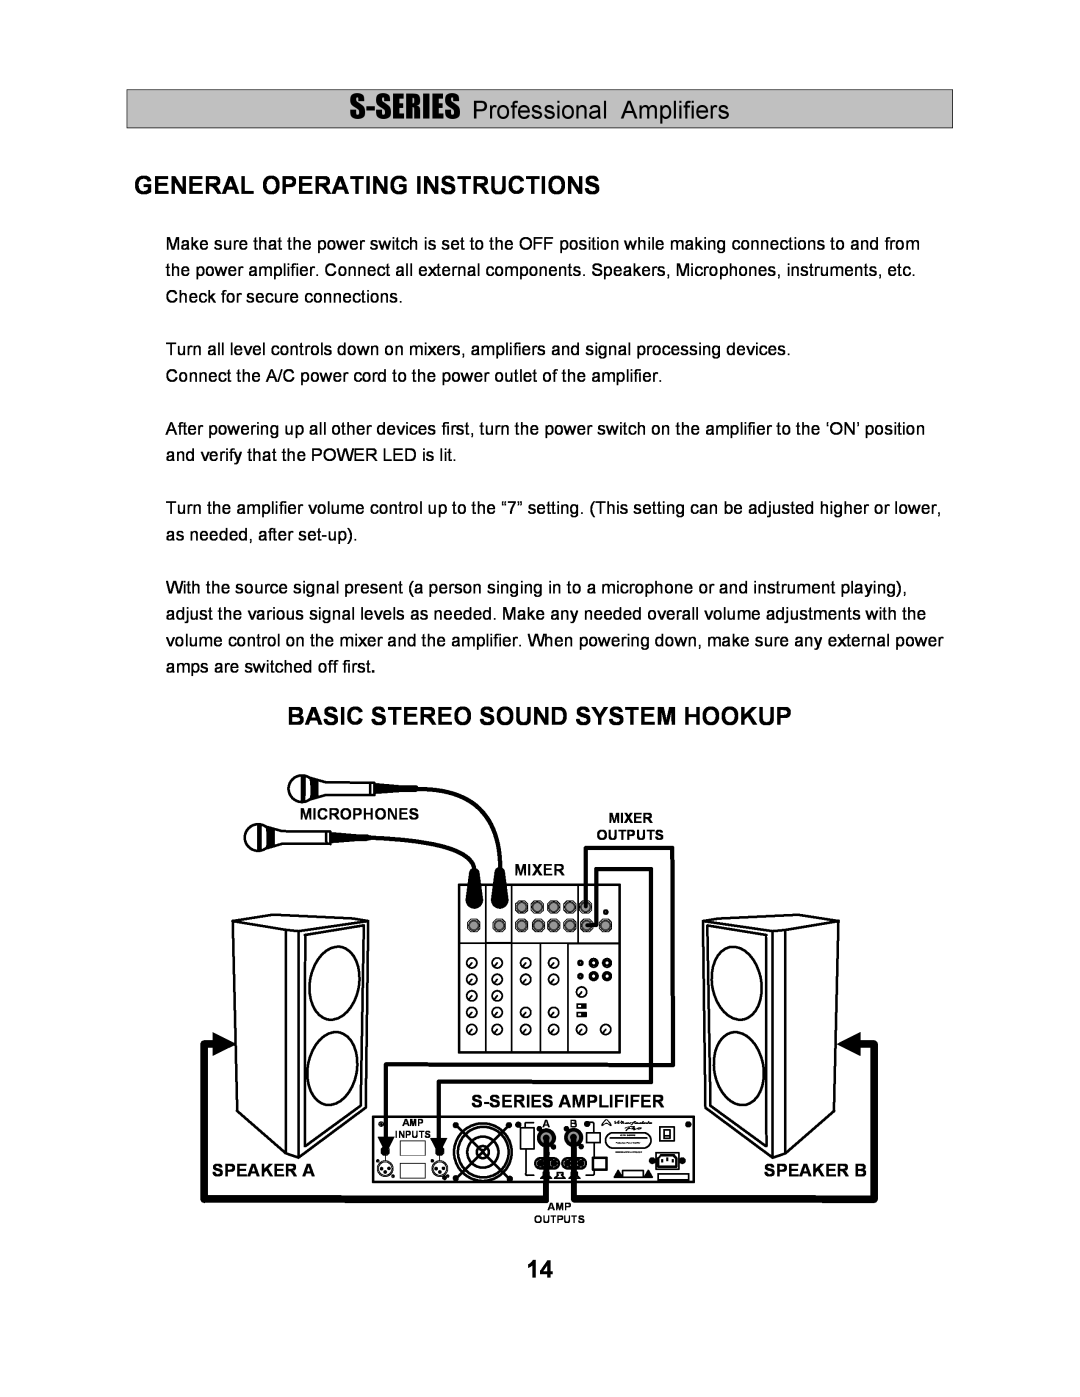 Wharfedale S-2500 manual General Operating Instructions, Basic Stereo Sound System Hookup, S-SERIES Professional Amplifiers 